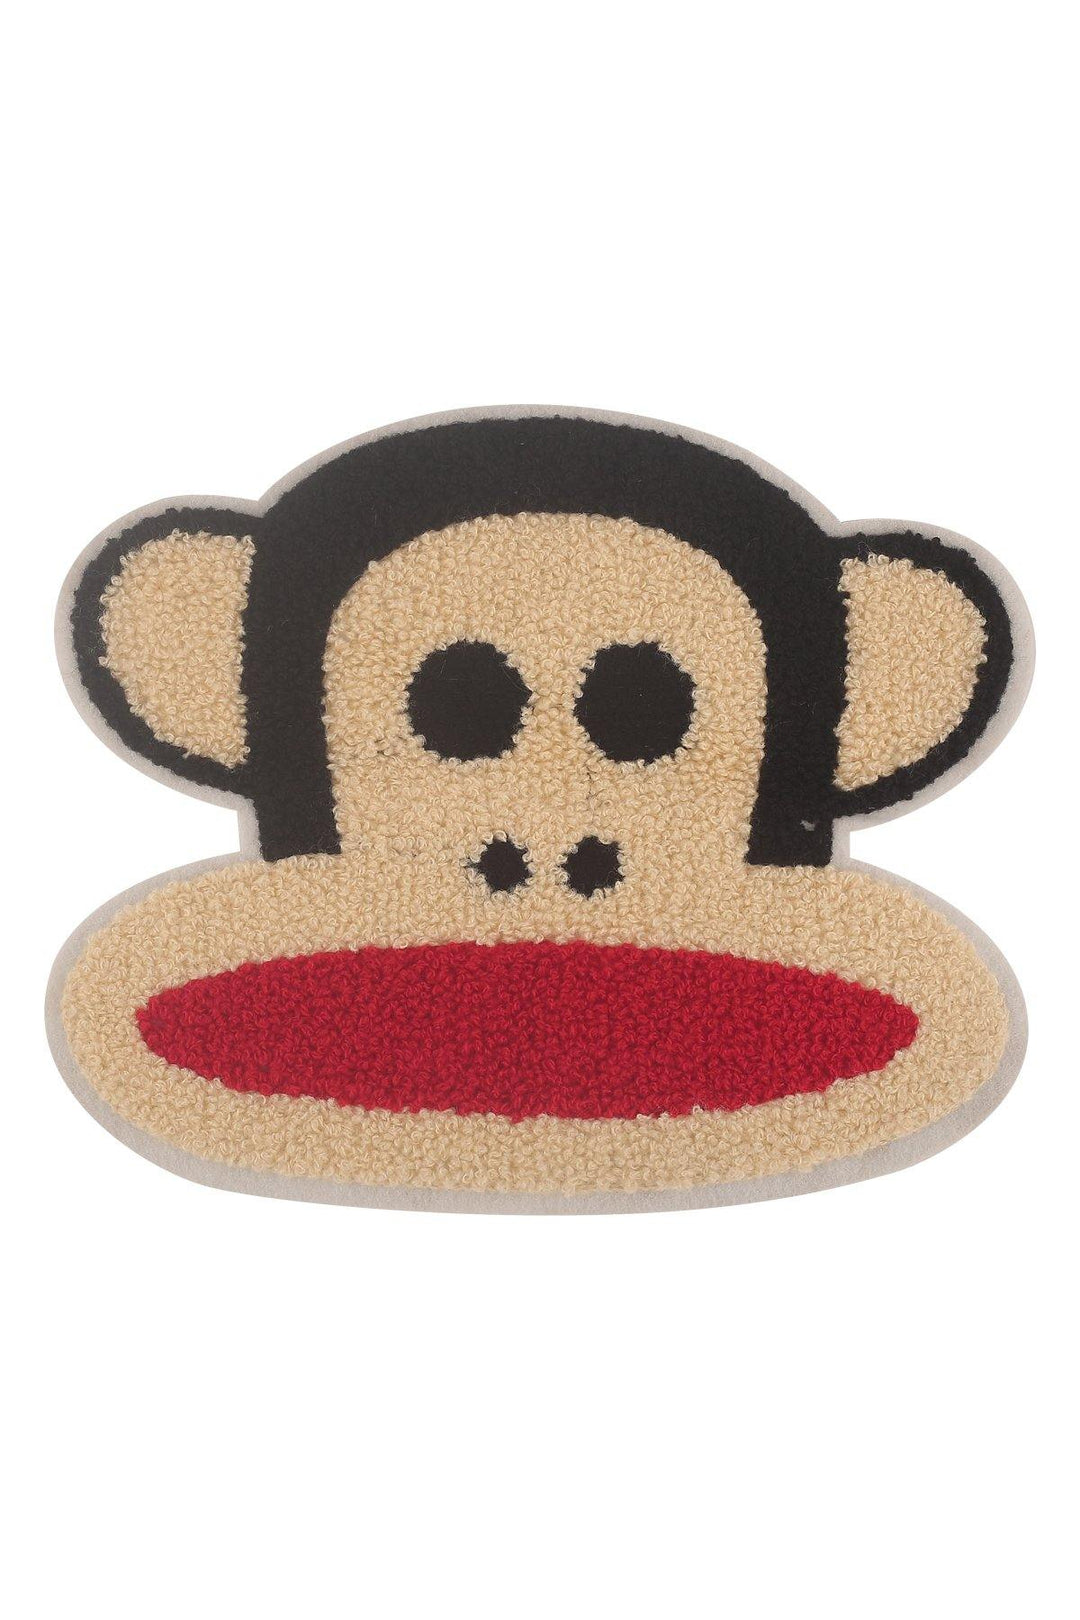 Funny Monkey Face Sew on Chenille Patch